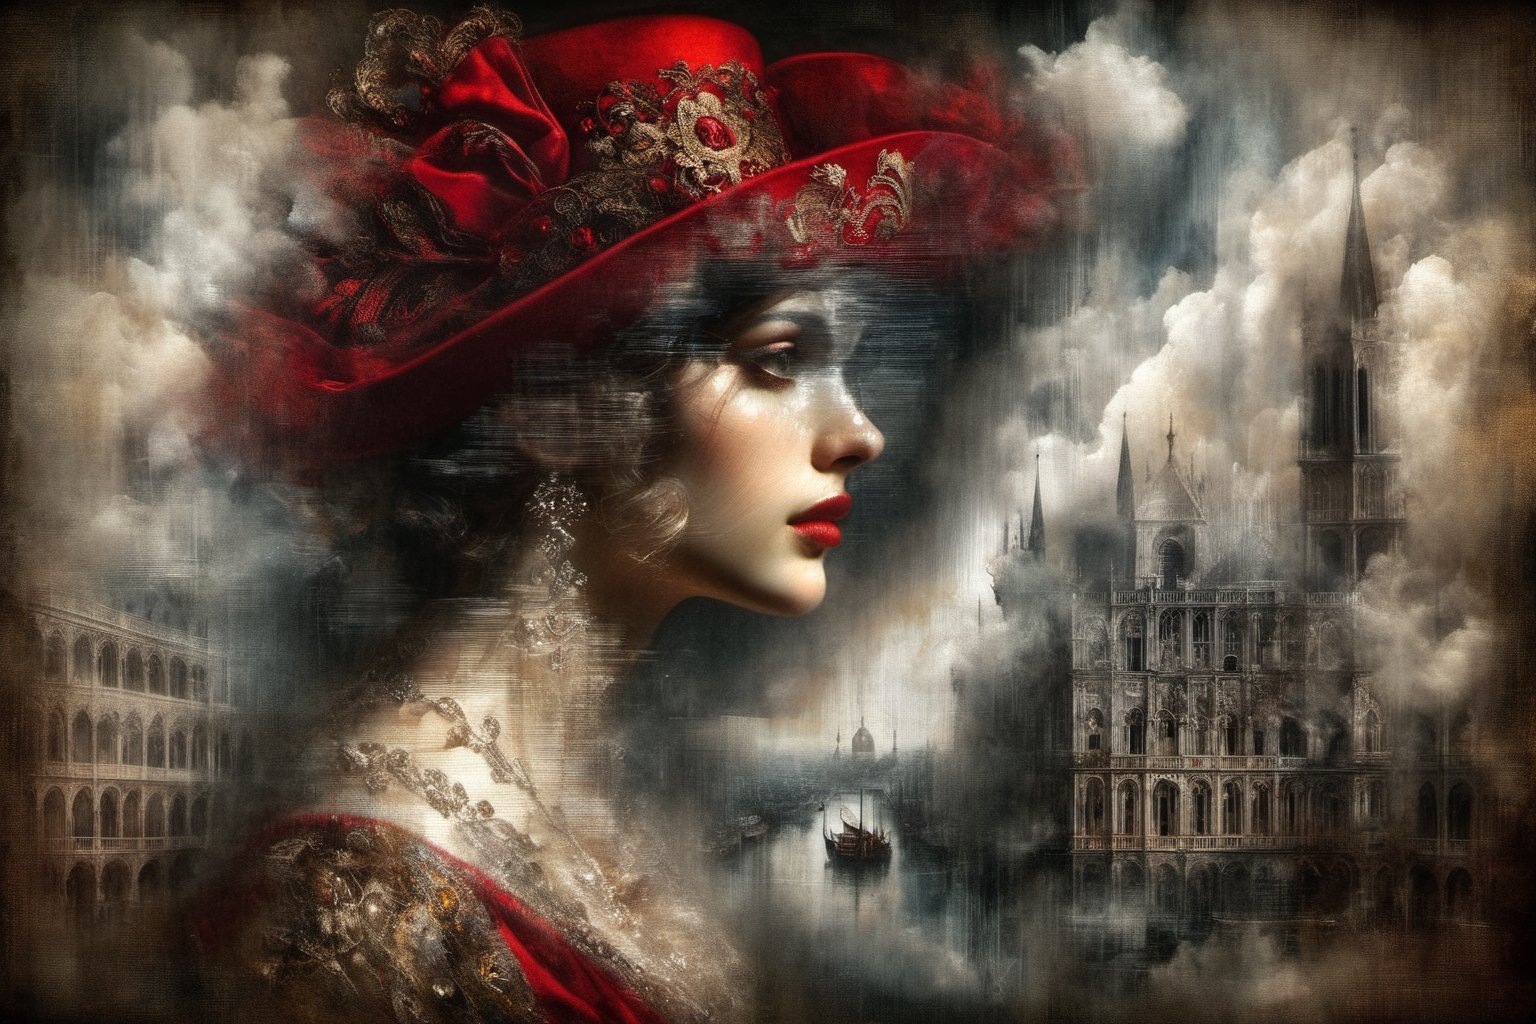 Double Exposure: portrait oil painting, of a ((transparent woman with a double exposure city in her head)), we see the double exposure on her face and the city backdrop, elaborate red hat, in renaissance attire city backdrop, 3/4 profile view, sumptuous cloud fabrics, detailed embroidery, moody chiaroscuro lighting, high-resolution